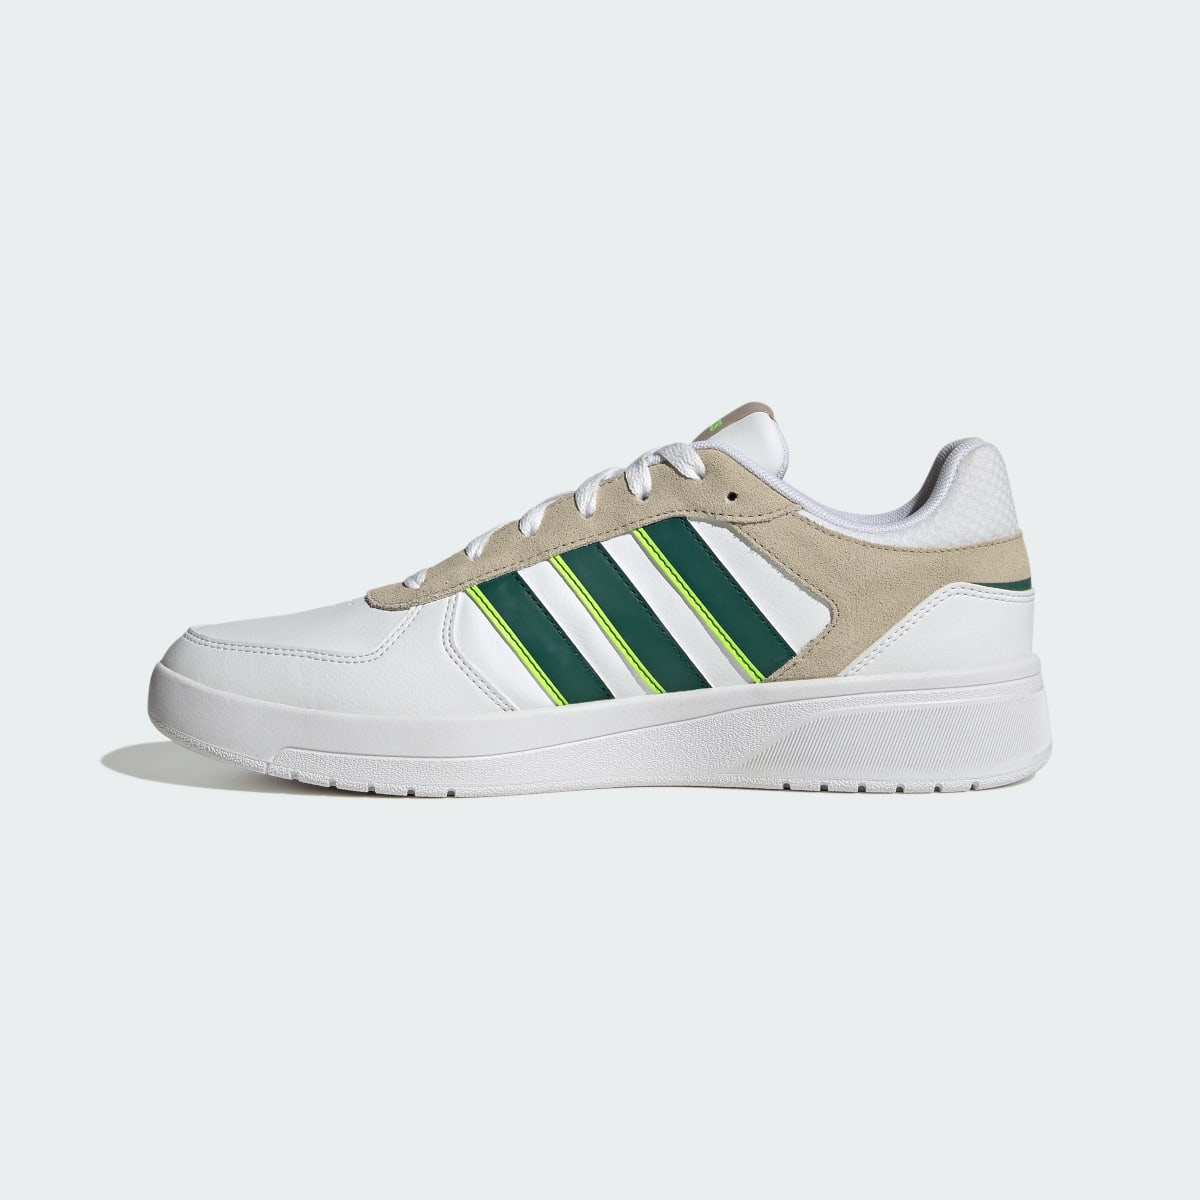 Adidas Courtbeat Shoes. 7